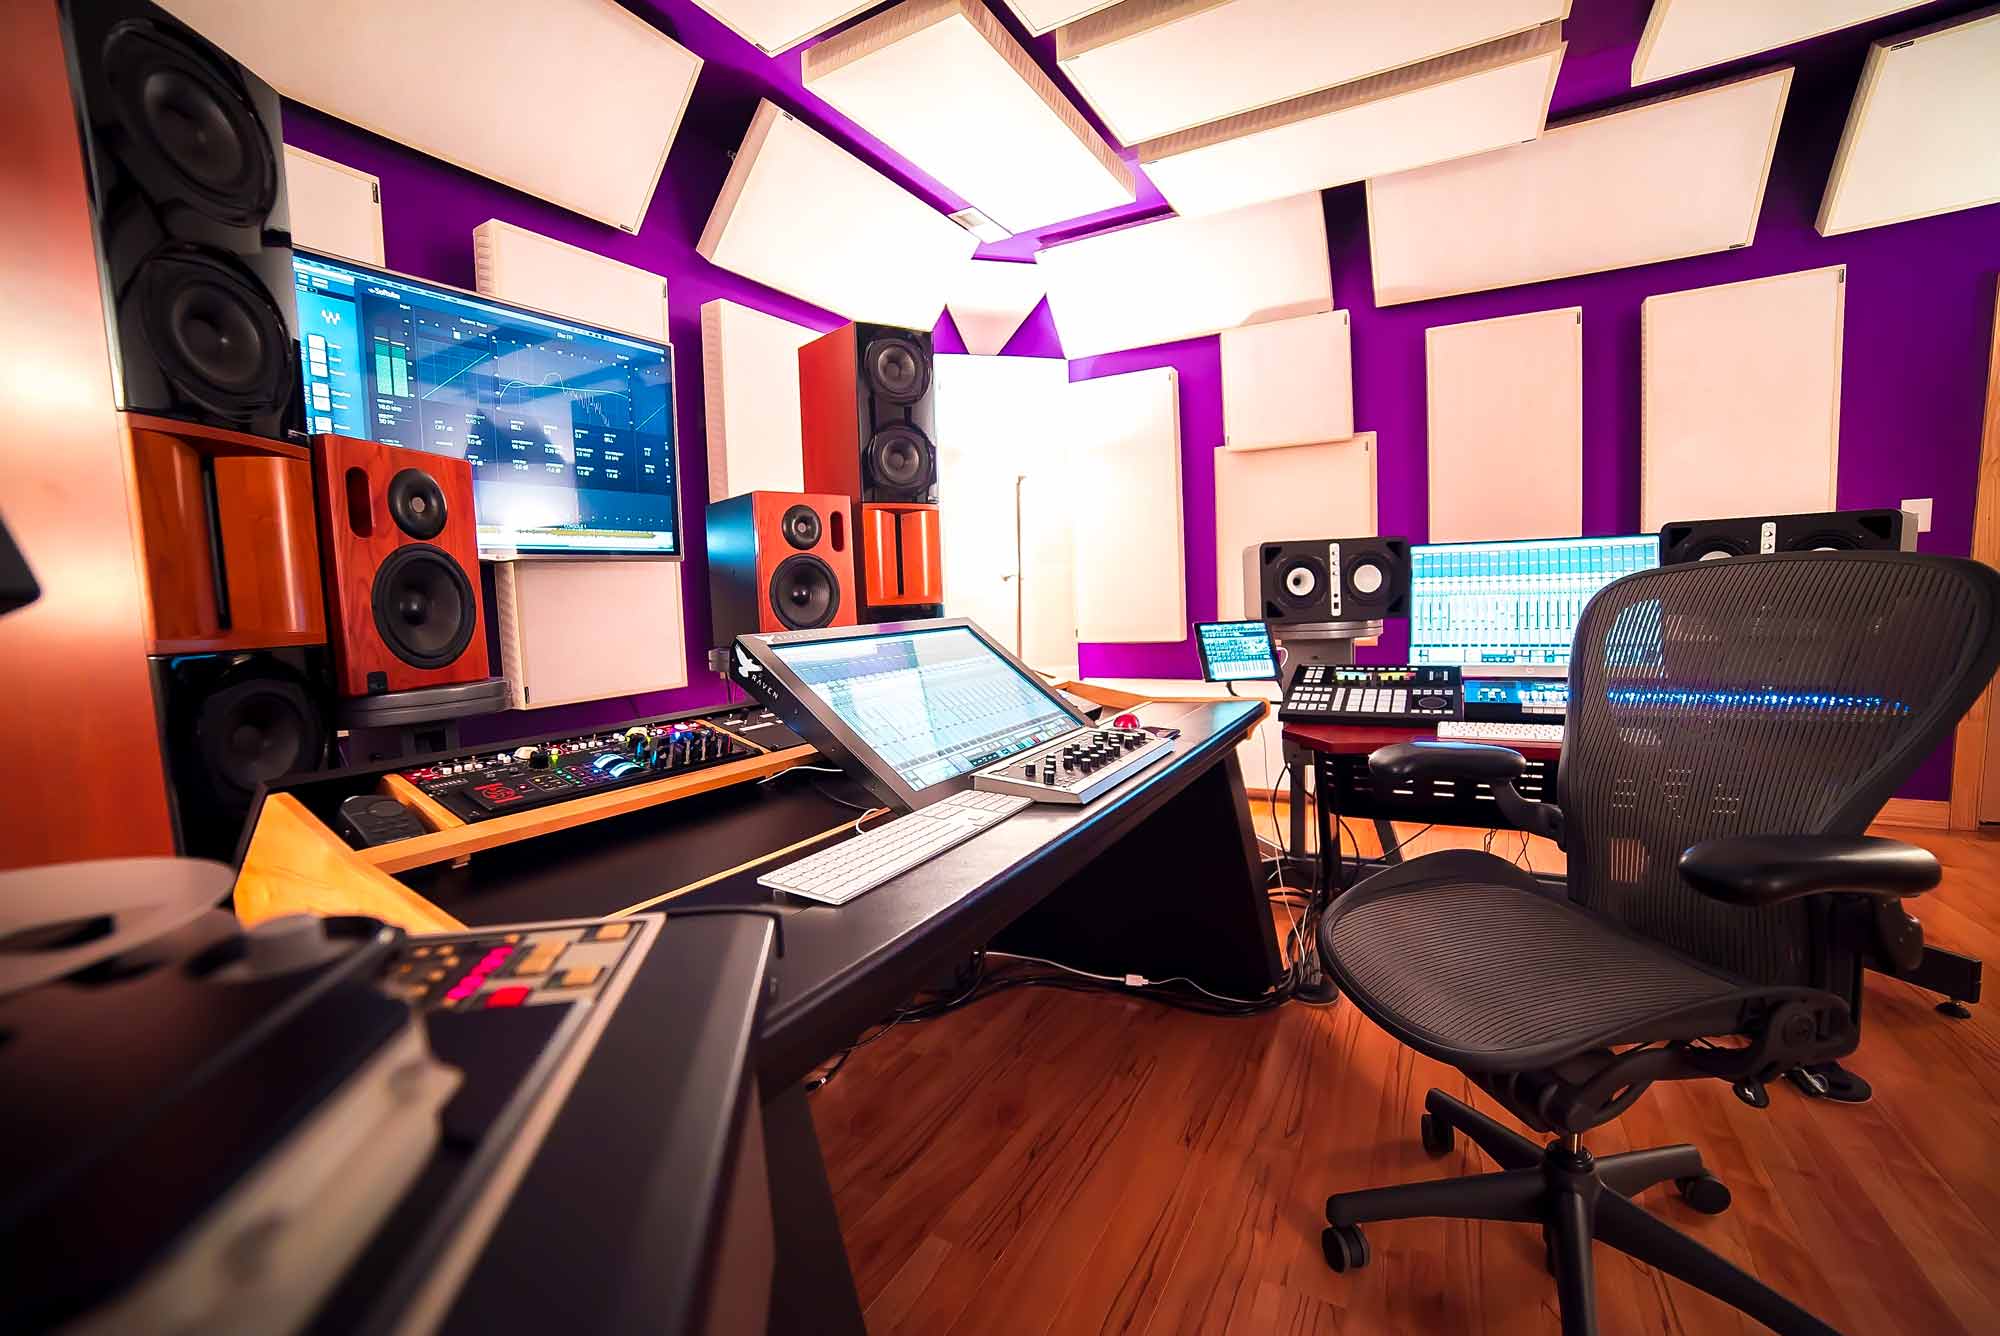 Cphonic Mastering Kevin McNoldy client testimonials photo from left of desk